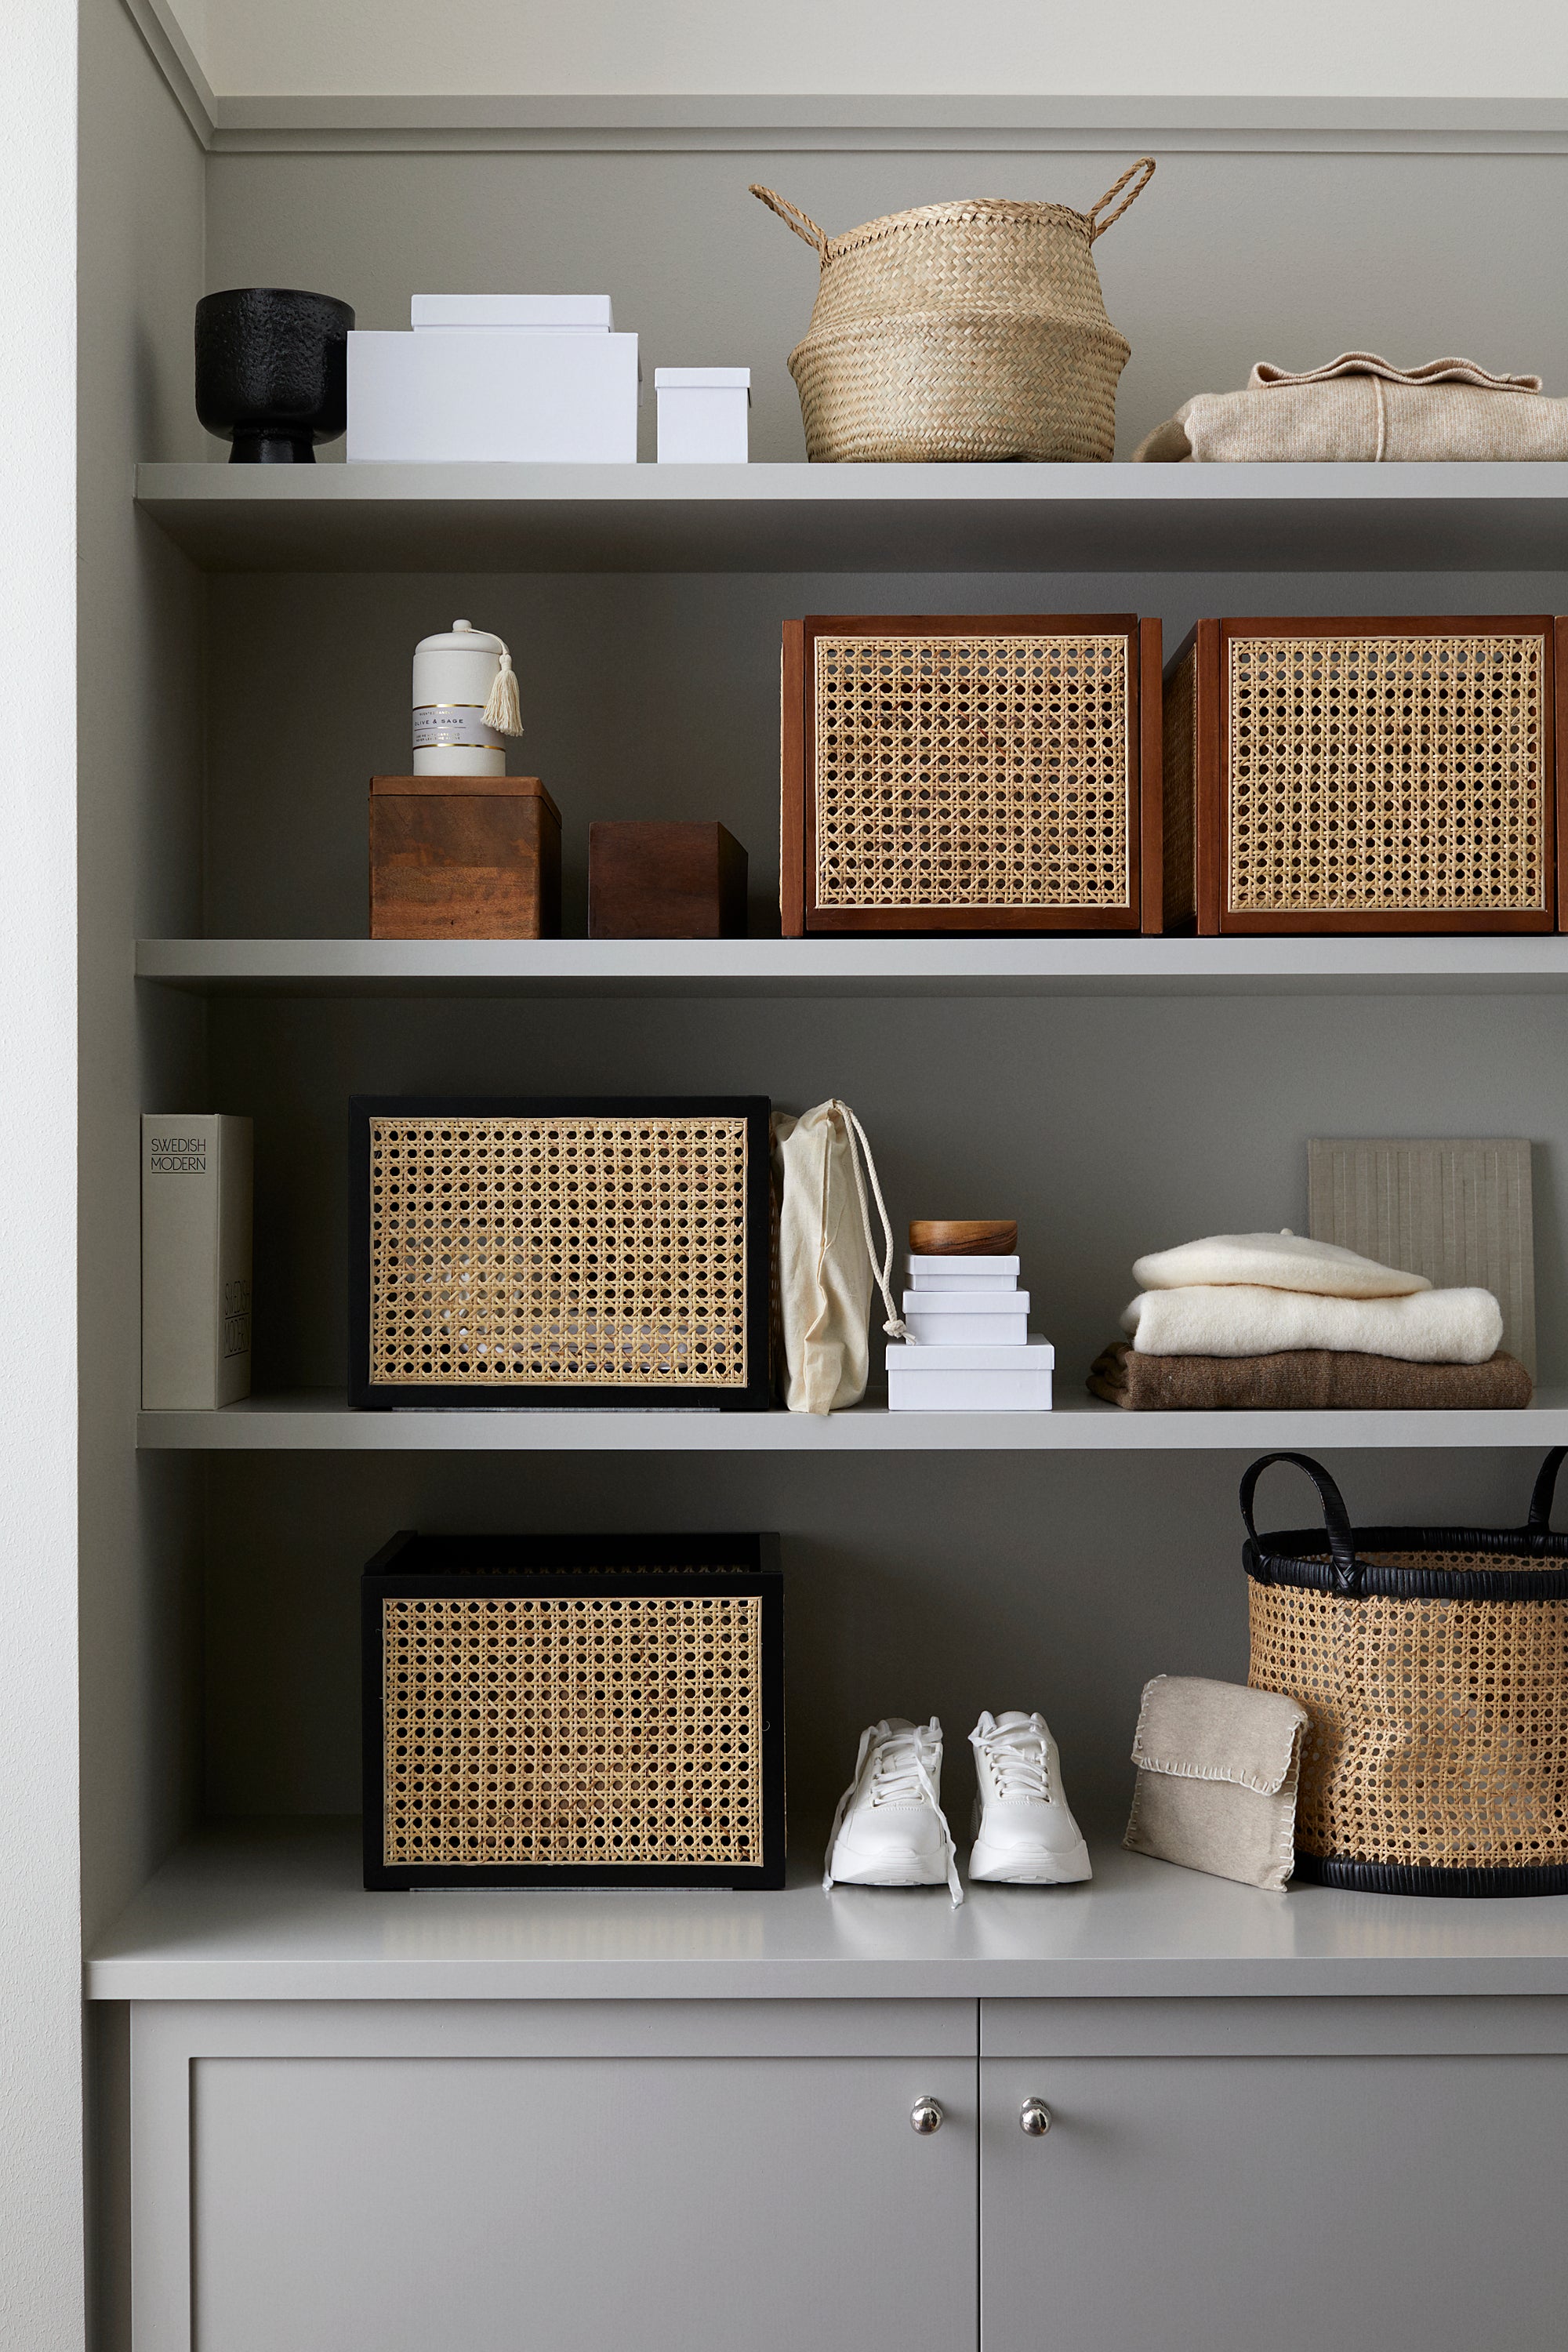 shelves with cane storage baskets